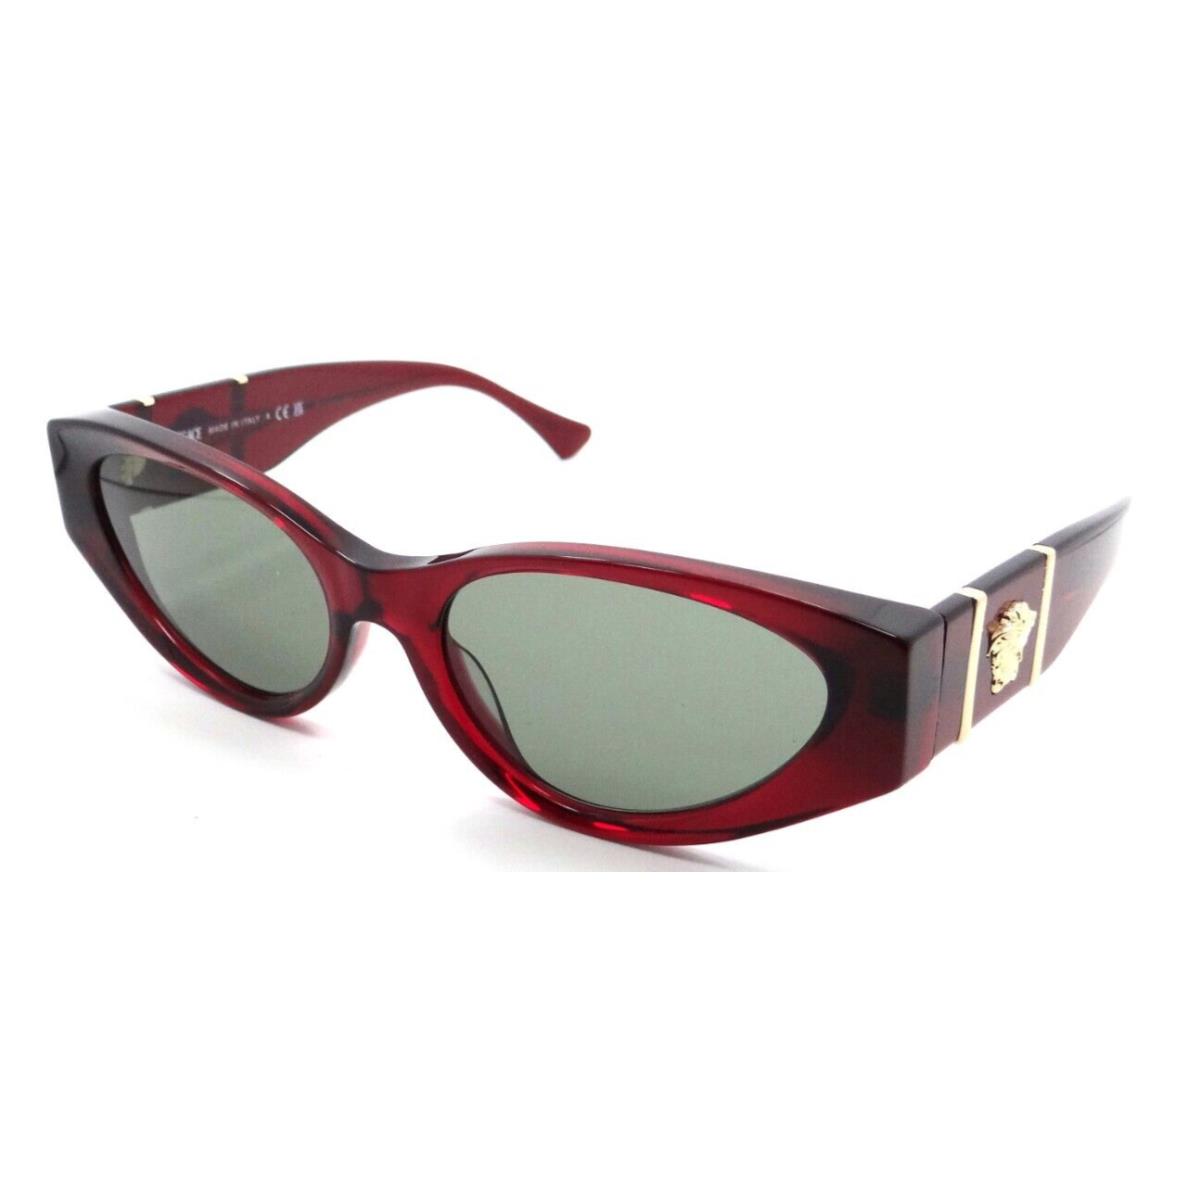 Versace Sunglasses VE 4454 5430/2 55-18-140 Bordeaux / Green Made in Italy